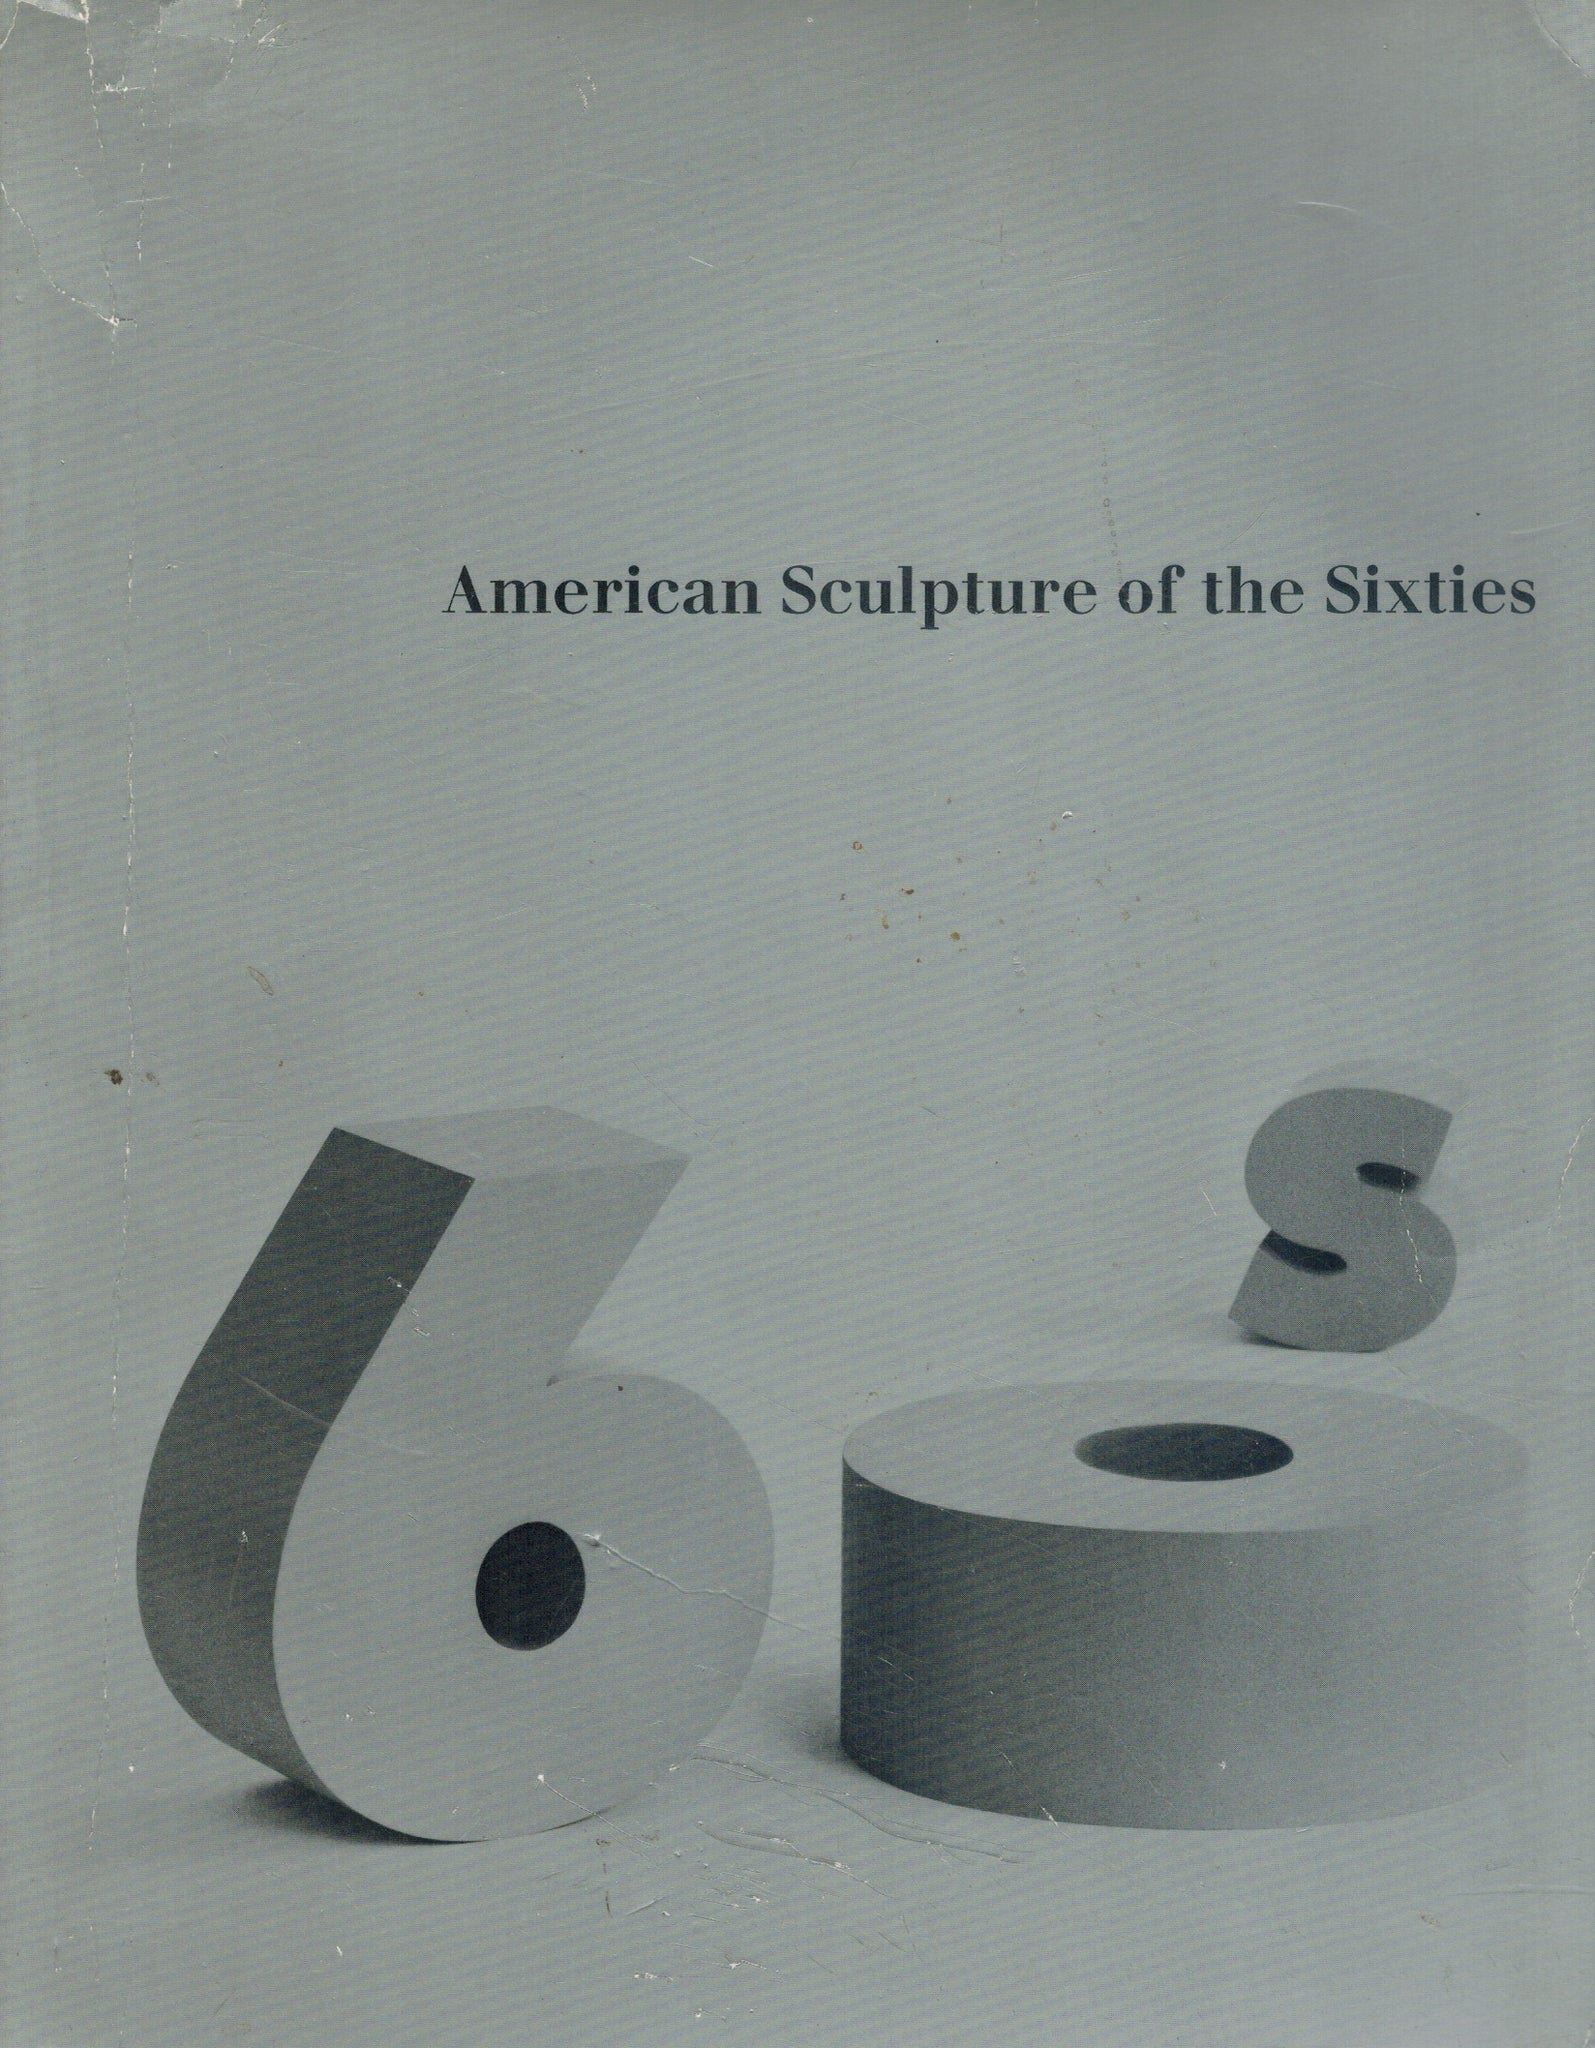 AMERICAN SCULPTURE OF THE SIXTIES. APRIL-JUNE 1967. CATALOGUE EDITED BY MAURICE TUCHMAN. 